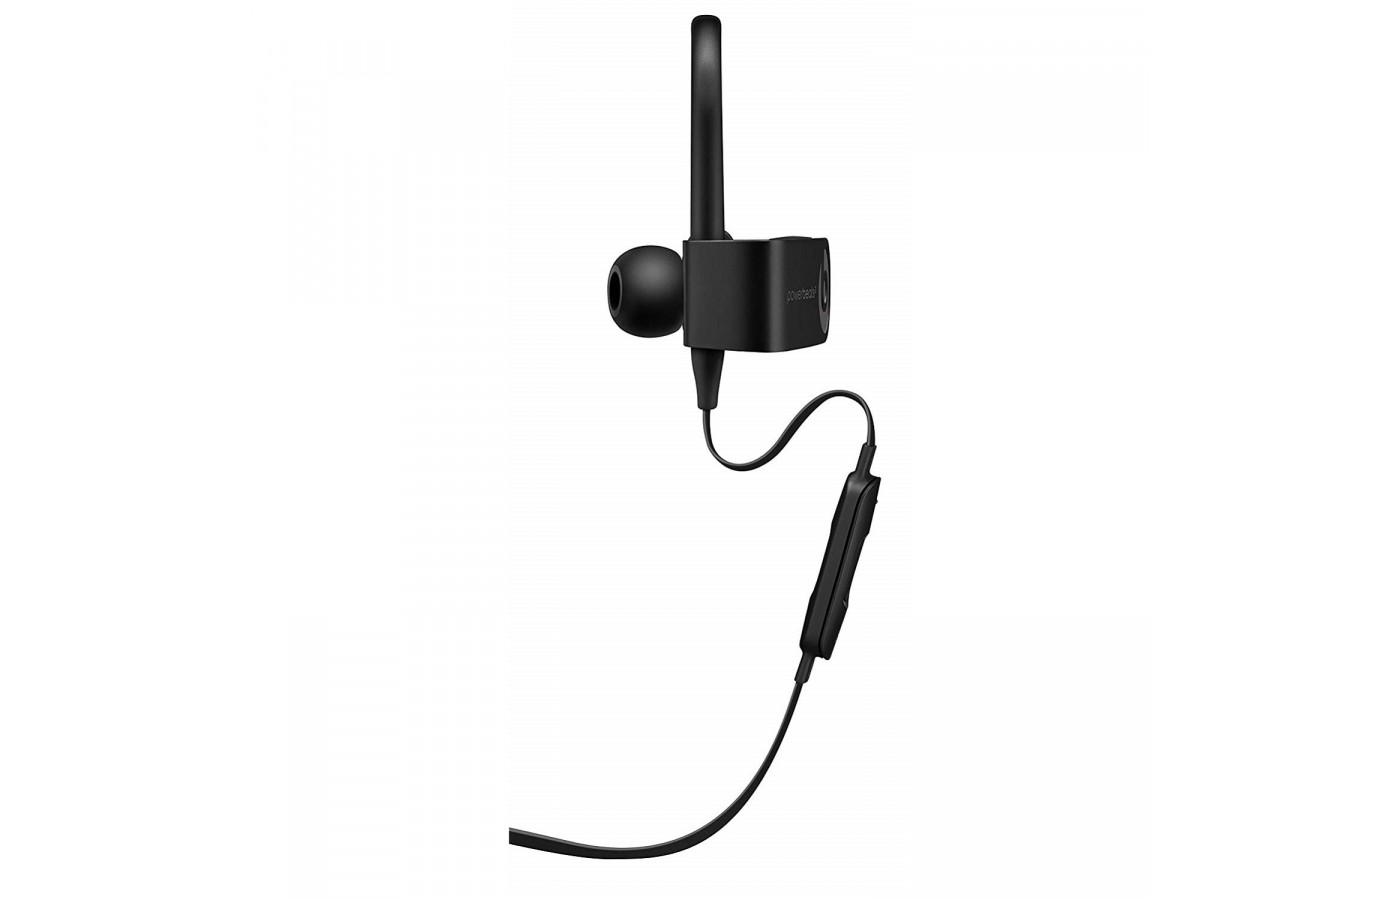 The Beats Powerbeats 3 offer a remote via their connection cord for ease-of-use when in motion.